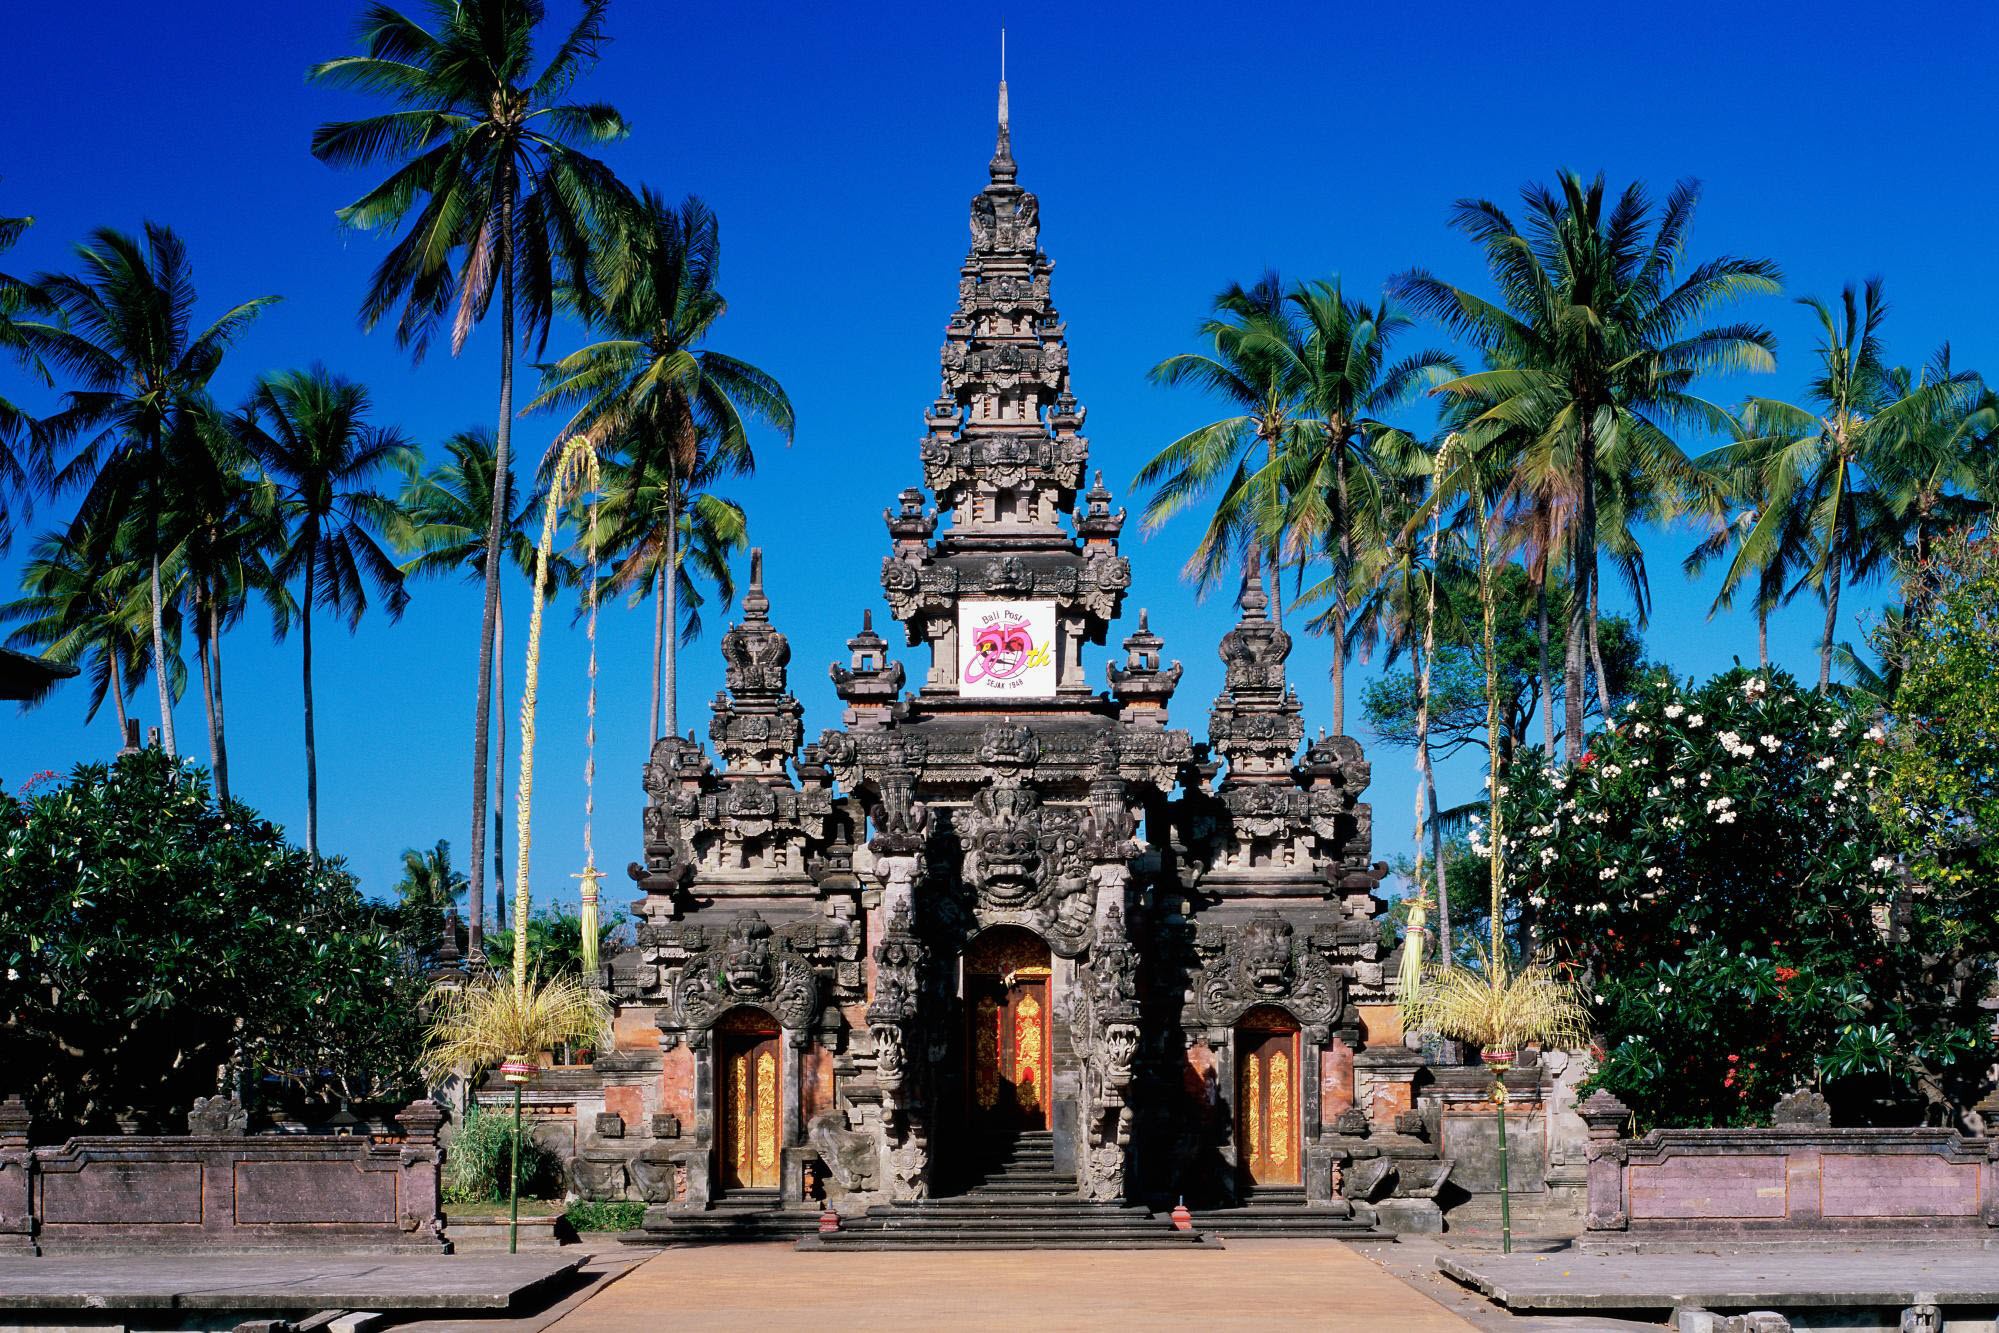 Bali Indonesia Building Asian Architecture Palm Trees Hindu Architecture Hinduism 1999x1333